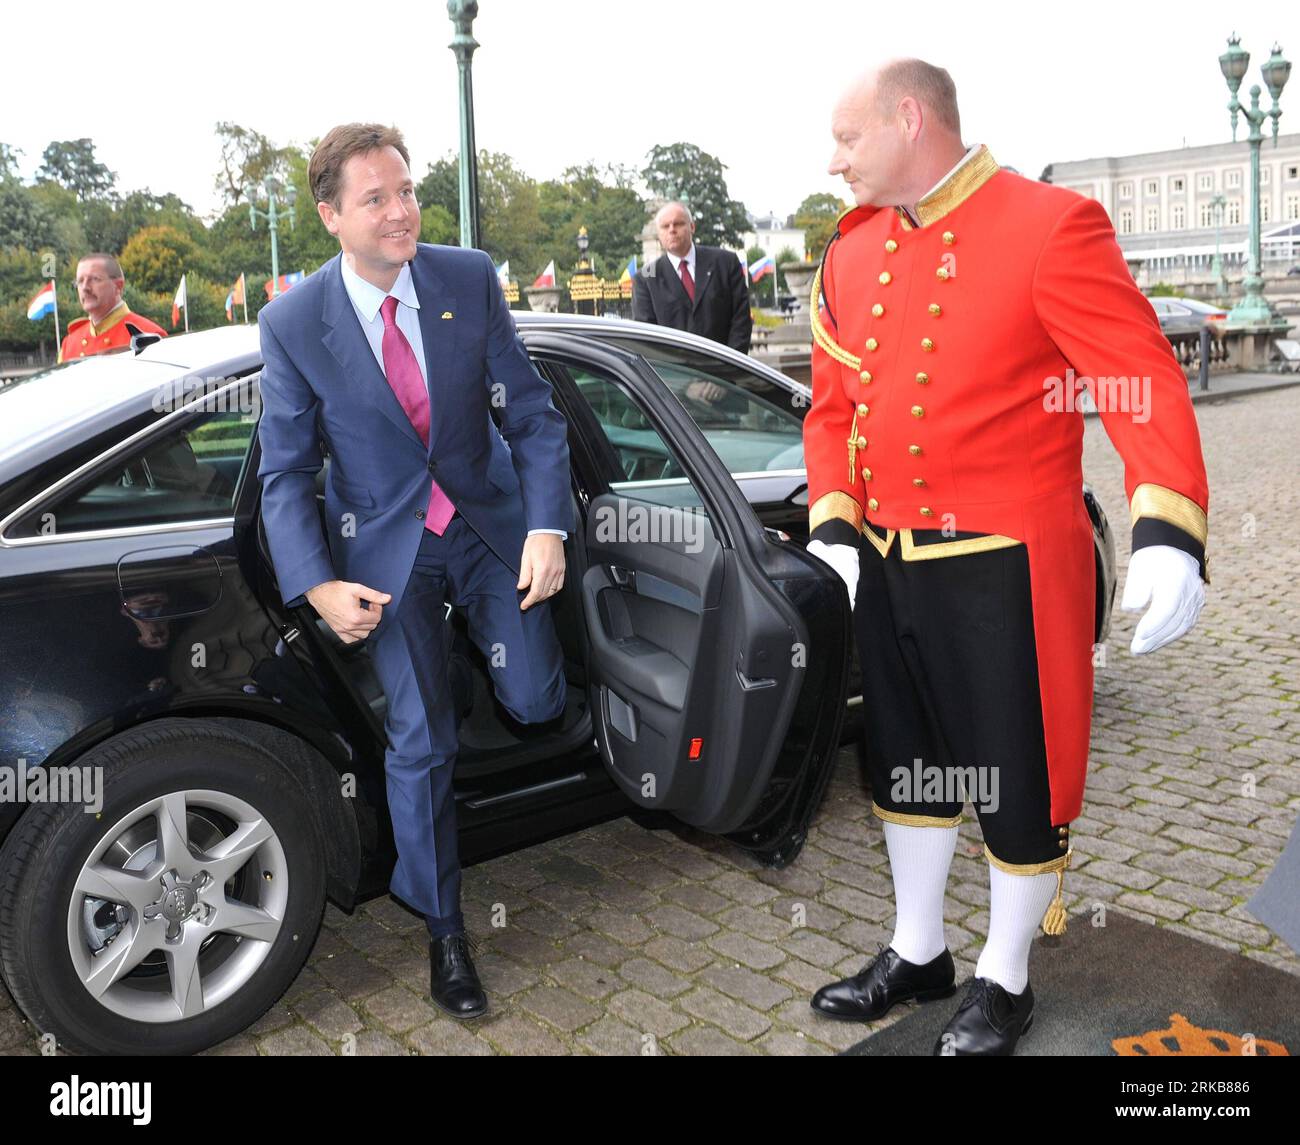 Bildnummer: 54510313  Datum: 04.10.2010  Copyright: imago/Xinhua (101005) -- BRUSSELS, Oct. 5, 2010 (Xinhua) -- Deputy Prime Minister of the United Kingdom Nick Clegg (L) arrives for the eighth Asia-Europe Meeting (ASEM) in Brussels, capital of Belgium on Oct. 4, 2010. (Xinhua/Wu Wei) (hdt) BELGIUM-BRUSSELS-ASEM-ARRIVAL PUBLICATIONxNOTxINxCHN People Politik Asien Europa Gipfel Treffen kbdig xdp premiumd 2010 quadrat  o0 Gipfeltreffen    Bildnummer 54510313 Date 04 10 2010 Copyright Imago XINHUA  Brussels OCT 5 2010 XINHUA Deputy Prime Ministers of The United Kingdom Nick Clegg l arrives for Th Stock Photo